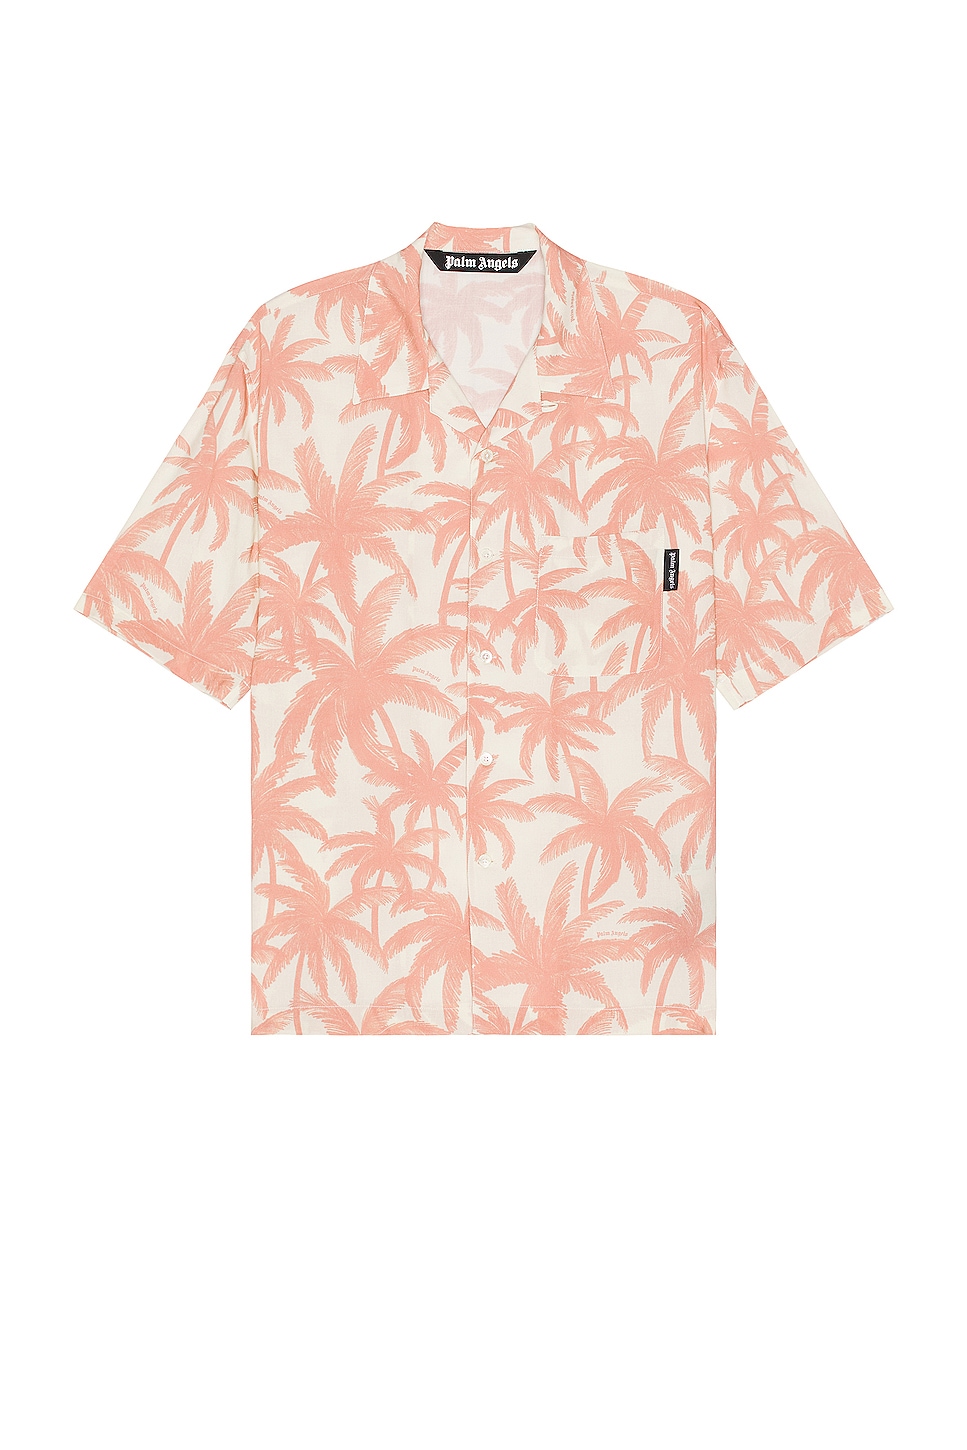 Image 1 of Palm Angels Allover Shirt in Off White & Pink